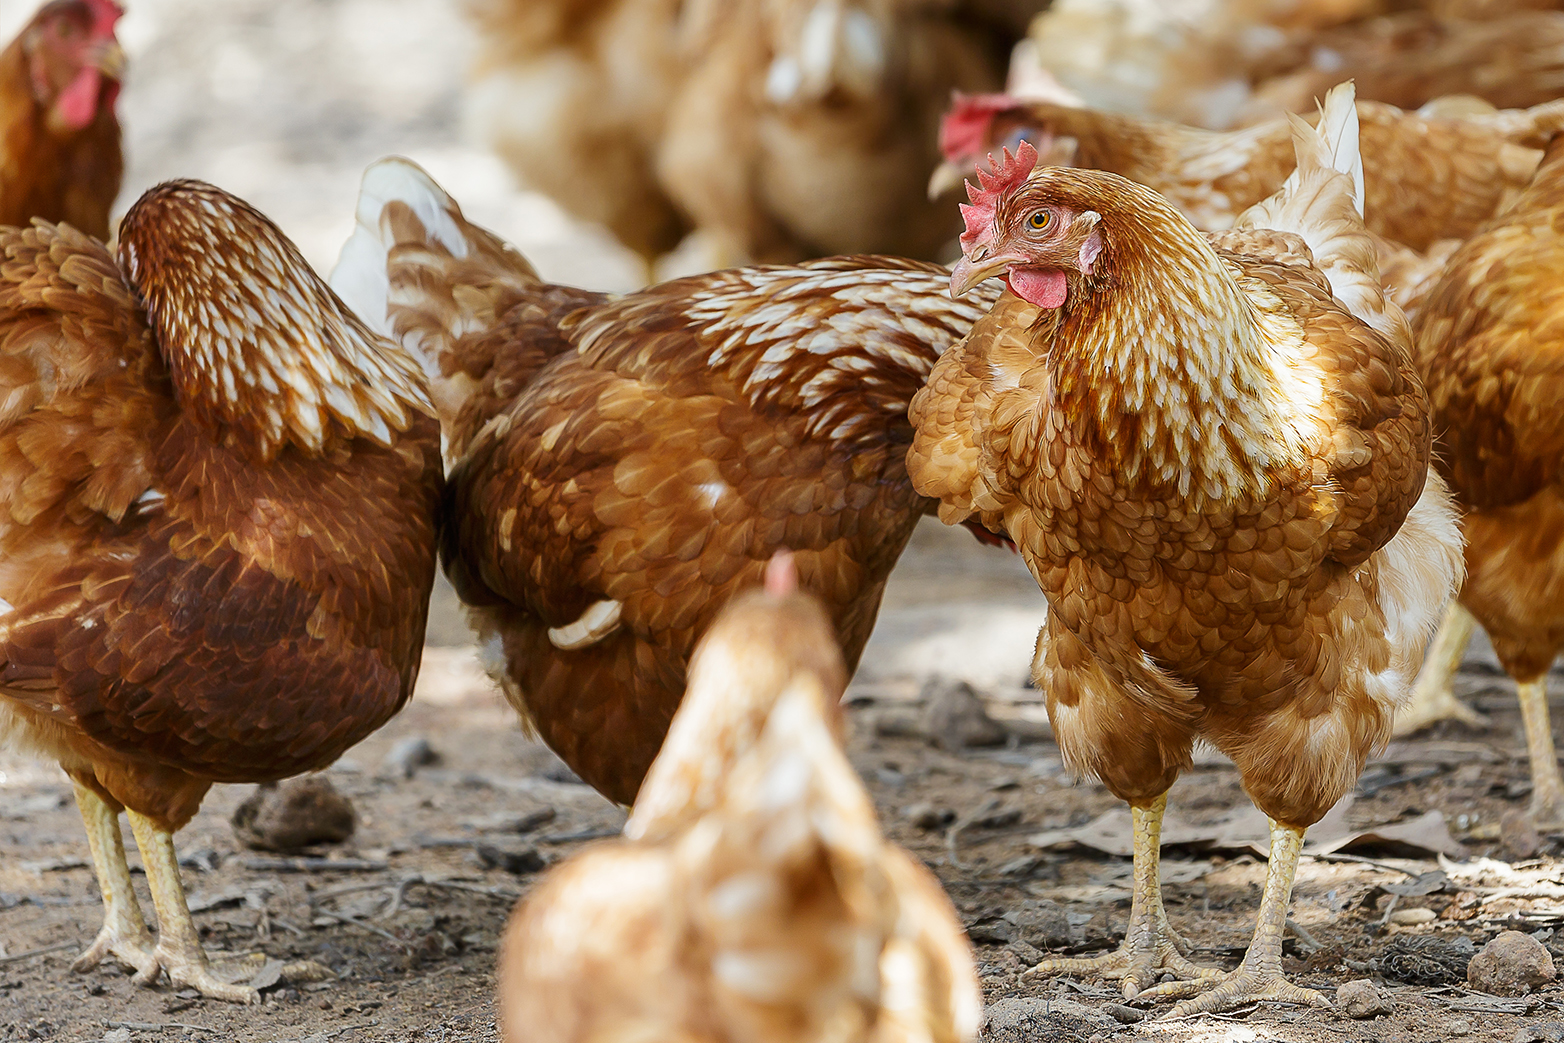 Antibiotic resistance is also on the rise in poultry farming. (Picture: Colourbox)